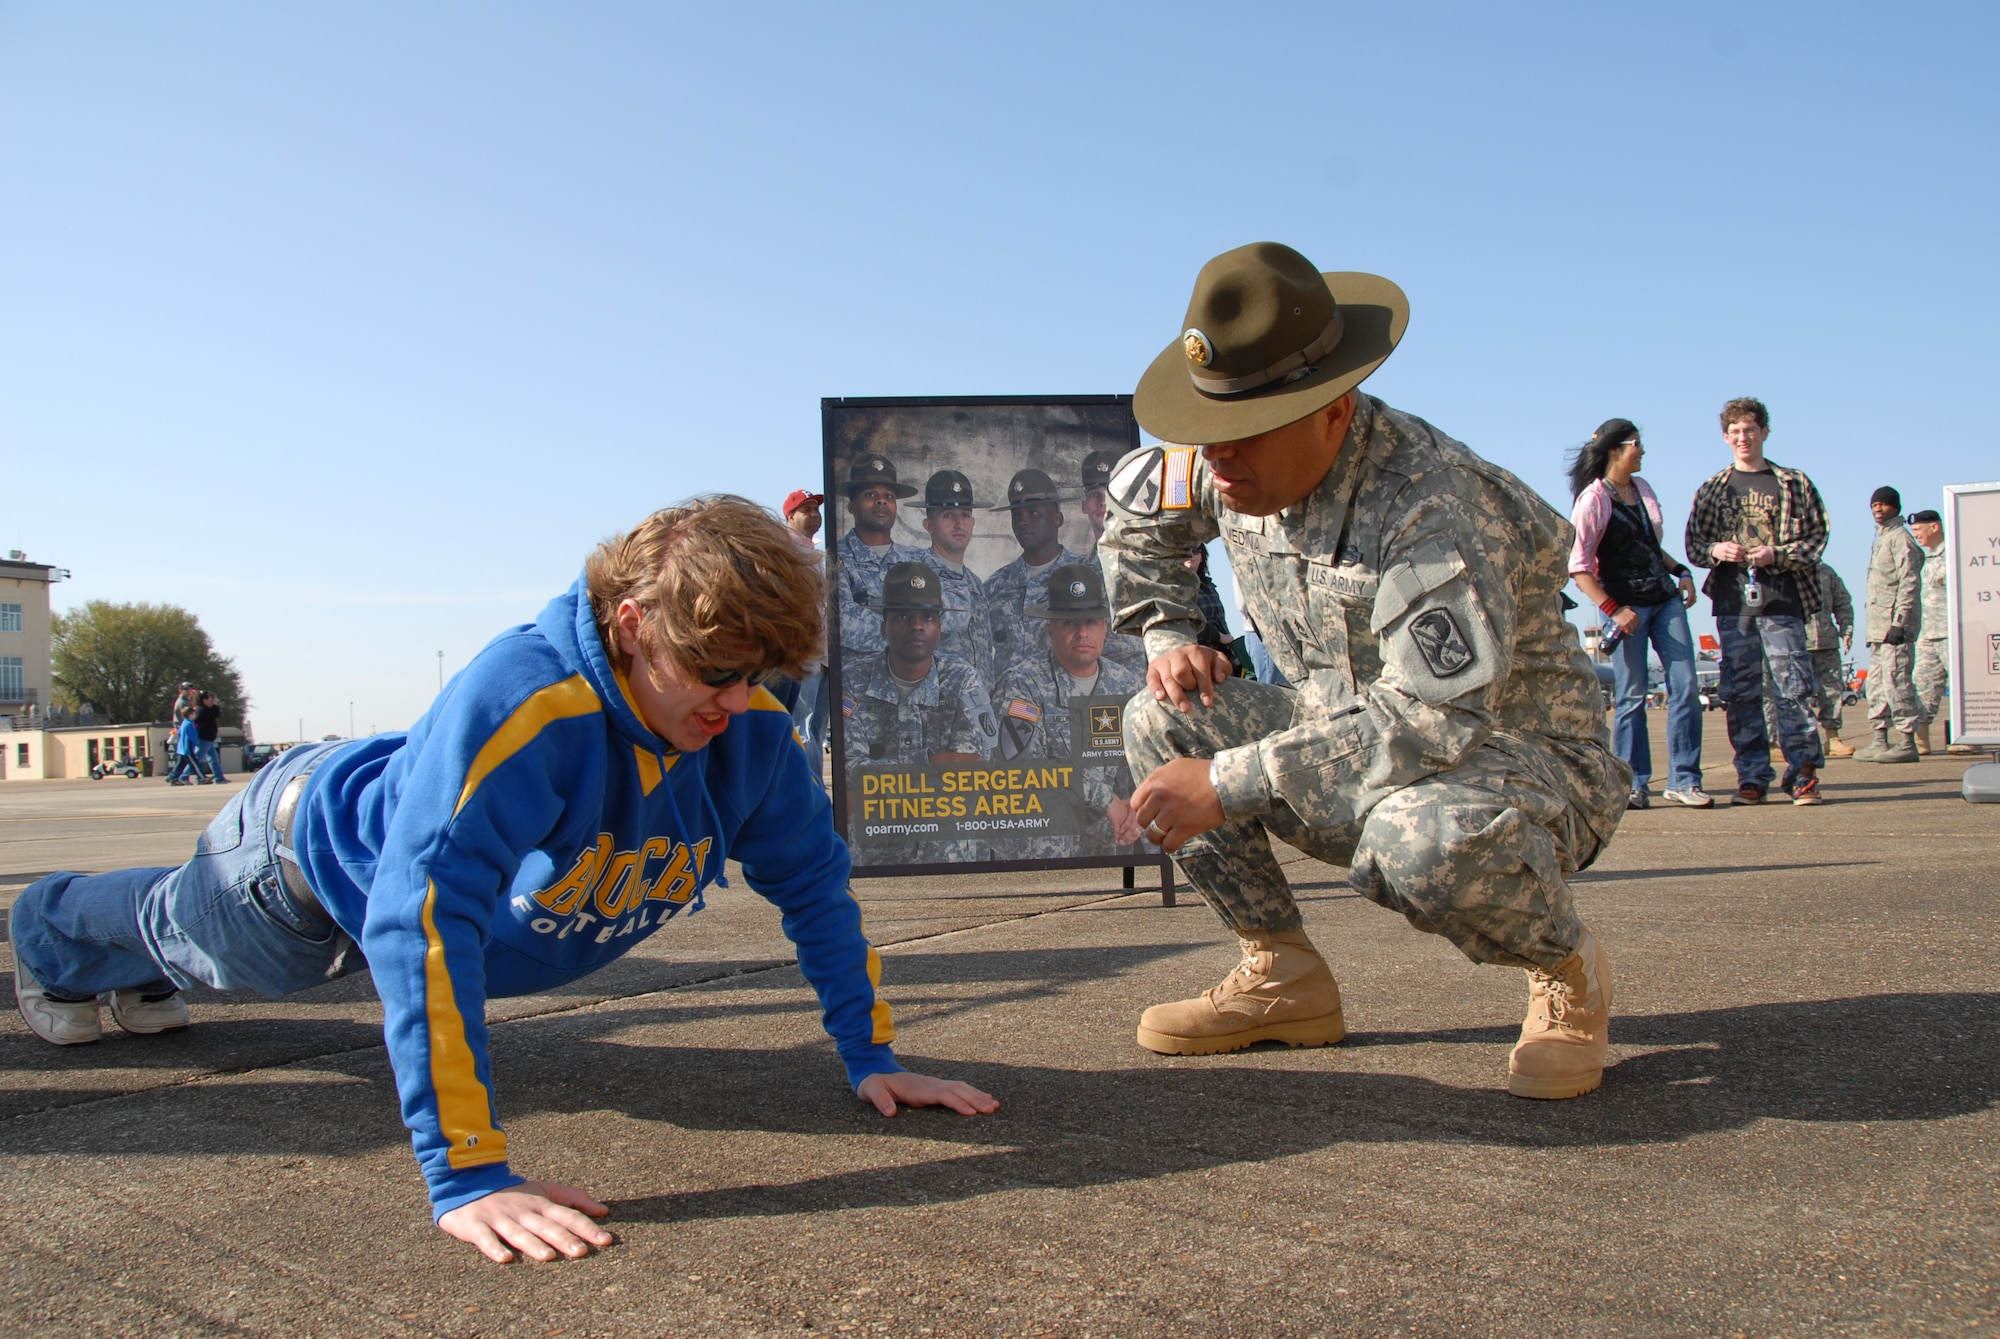 Sgt. 1st Class Miguel Medina Jr., an Army recruiter, counts as Ryan Clancy of Alpharetta, Ga. does push ups trying to win a T-shirt at the Thunder Over Alabama air show at Maxwell Air Force Base on March 27, 2010. The Maxwell Open House and Air Show is celebrating 100 years of flight over Alabama. (U.S. Air Force photo/Jamie Pitcher)